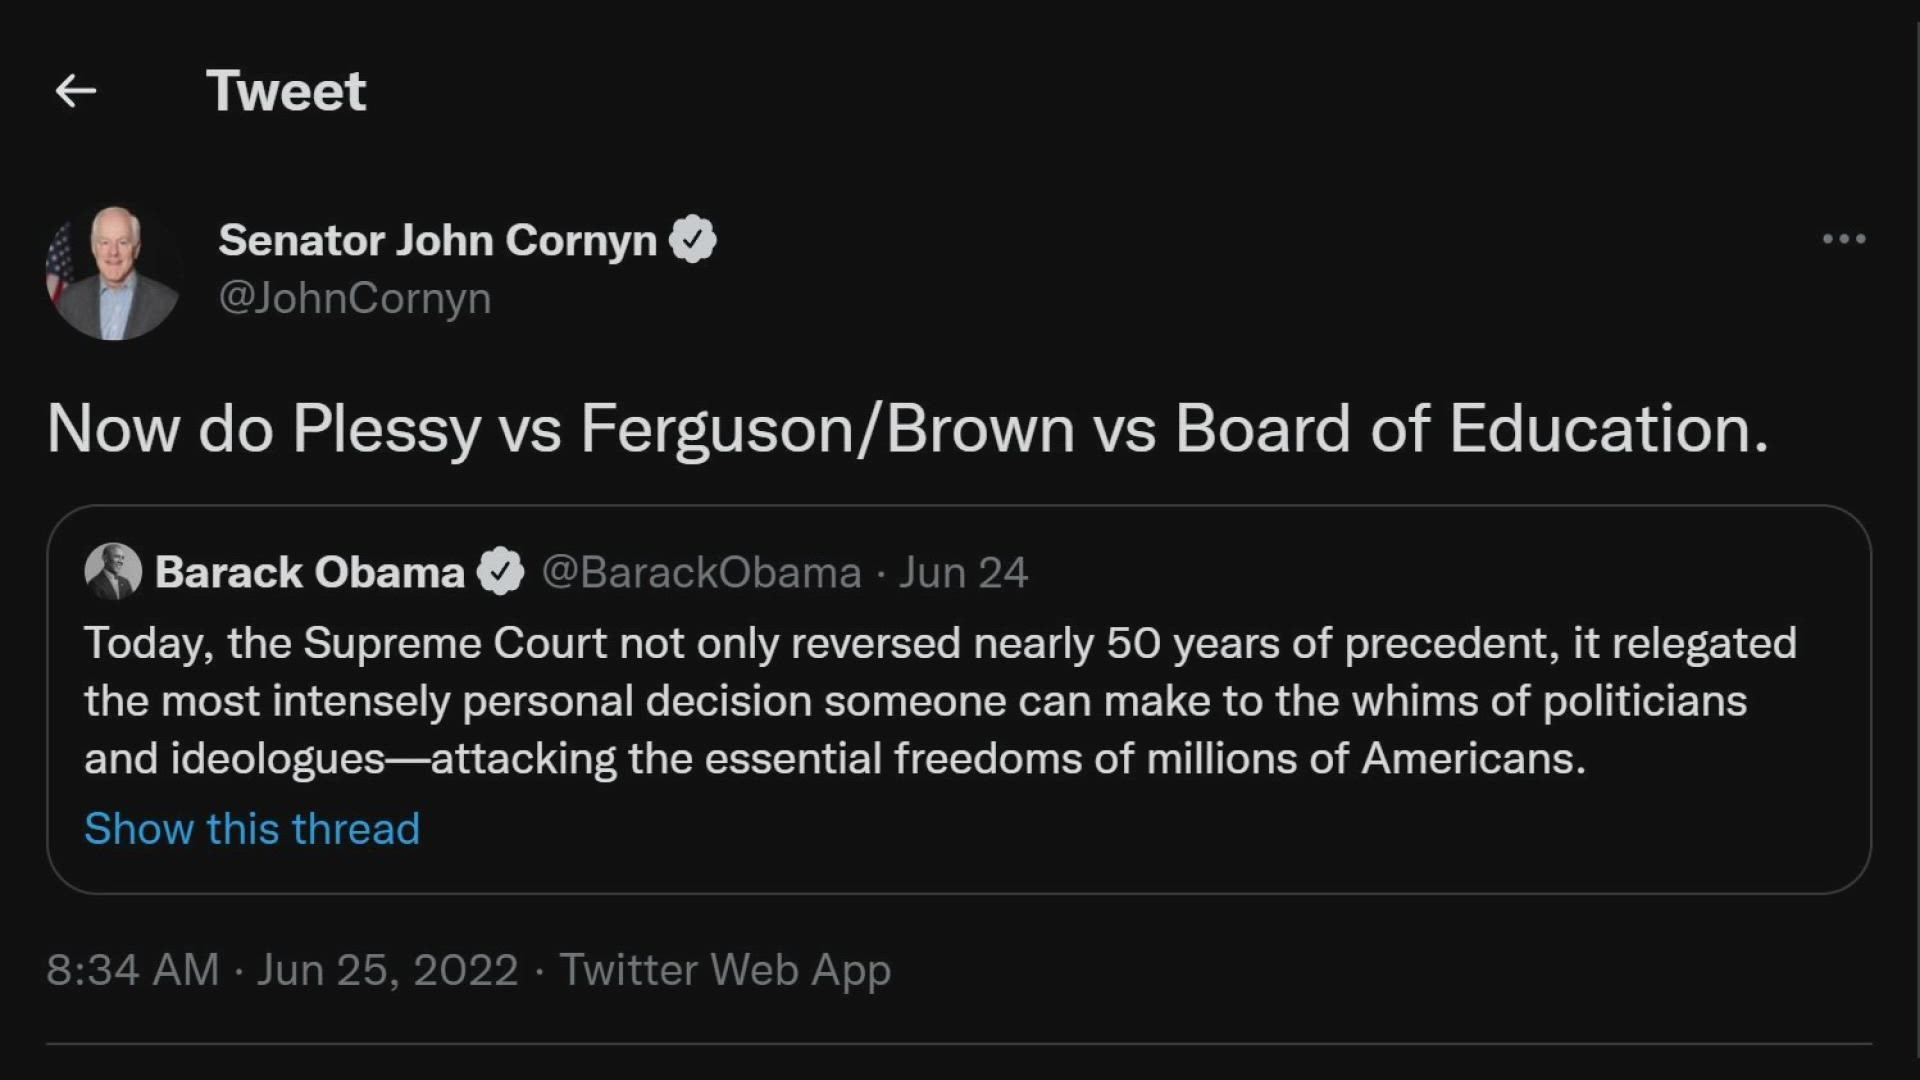 Sen. John Cornyn responded to a tweet by former president Barack Obama that denounced the Roe v. Wade decision.